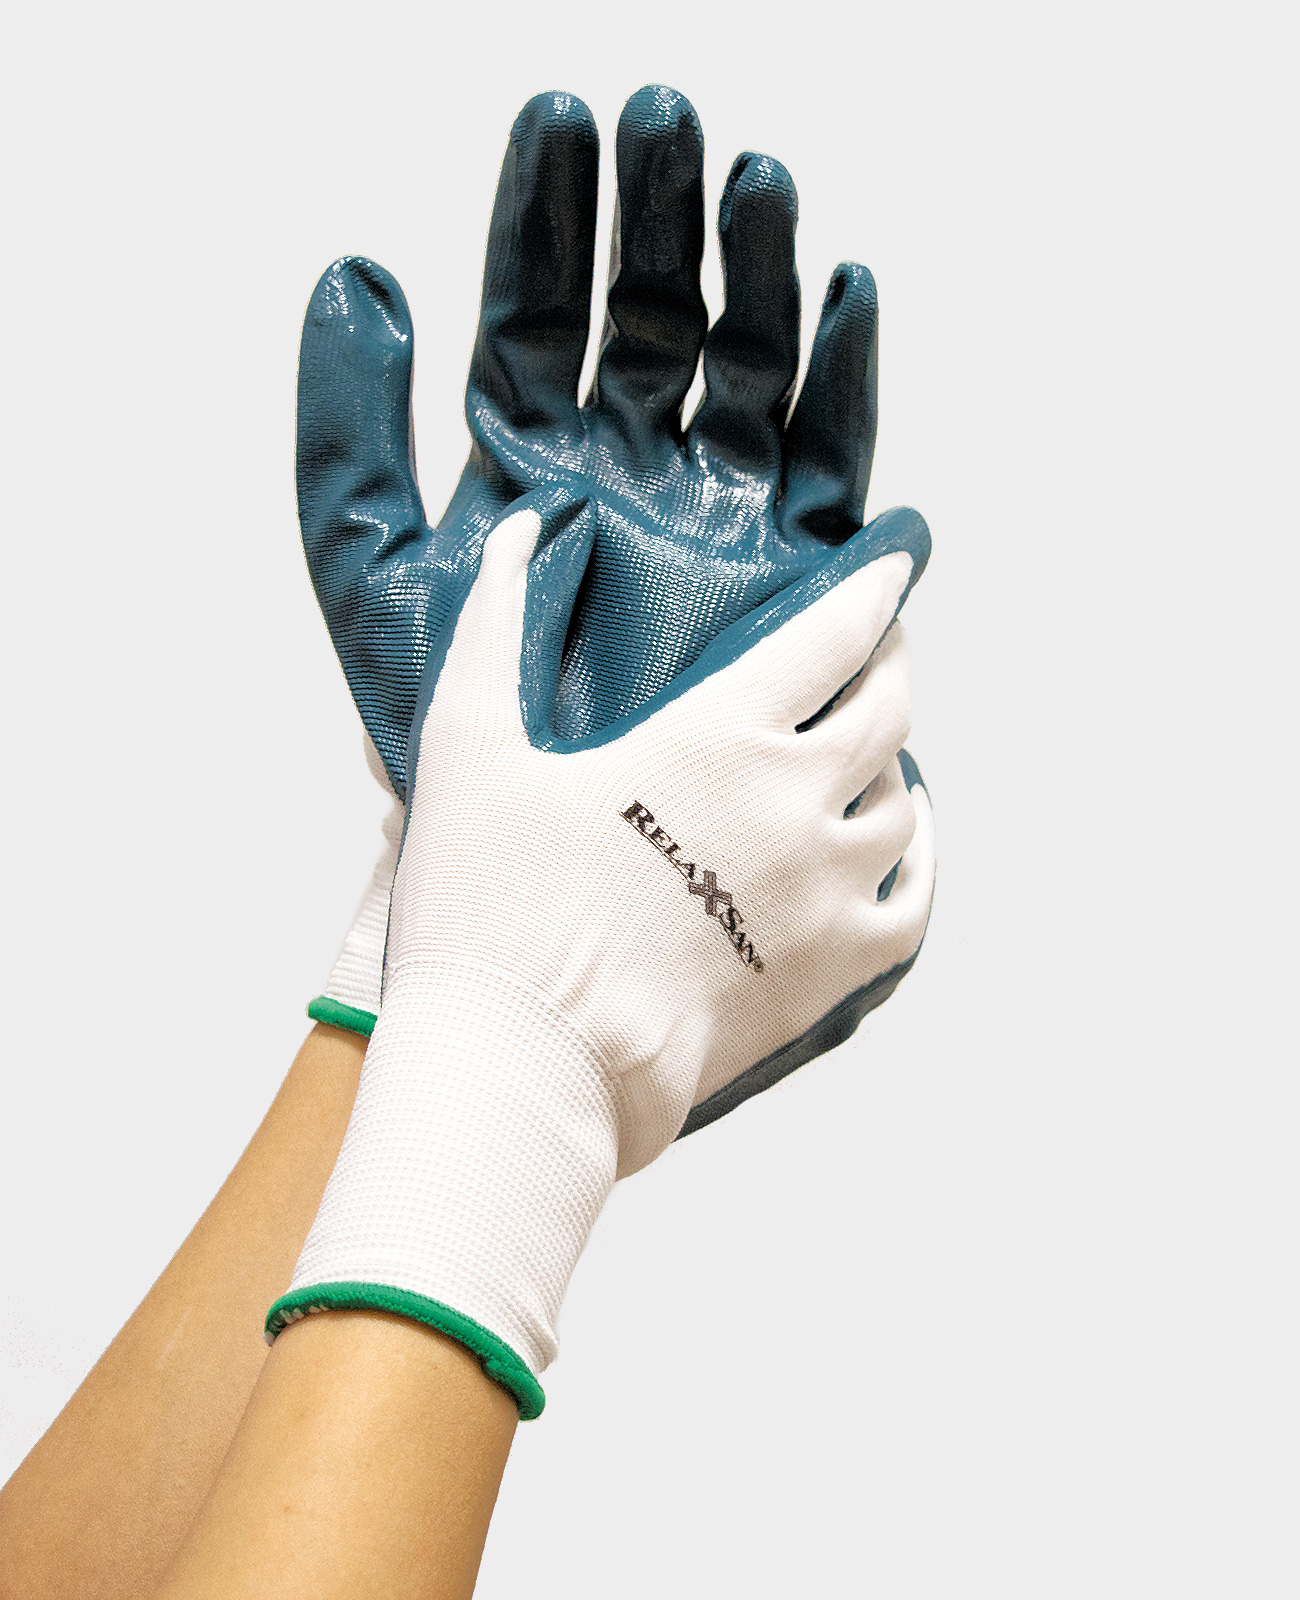 marketing_accessories-relaxsan-gloves